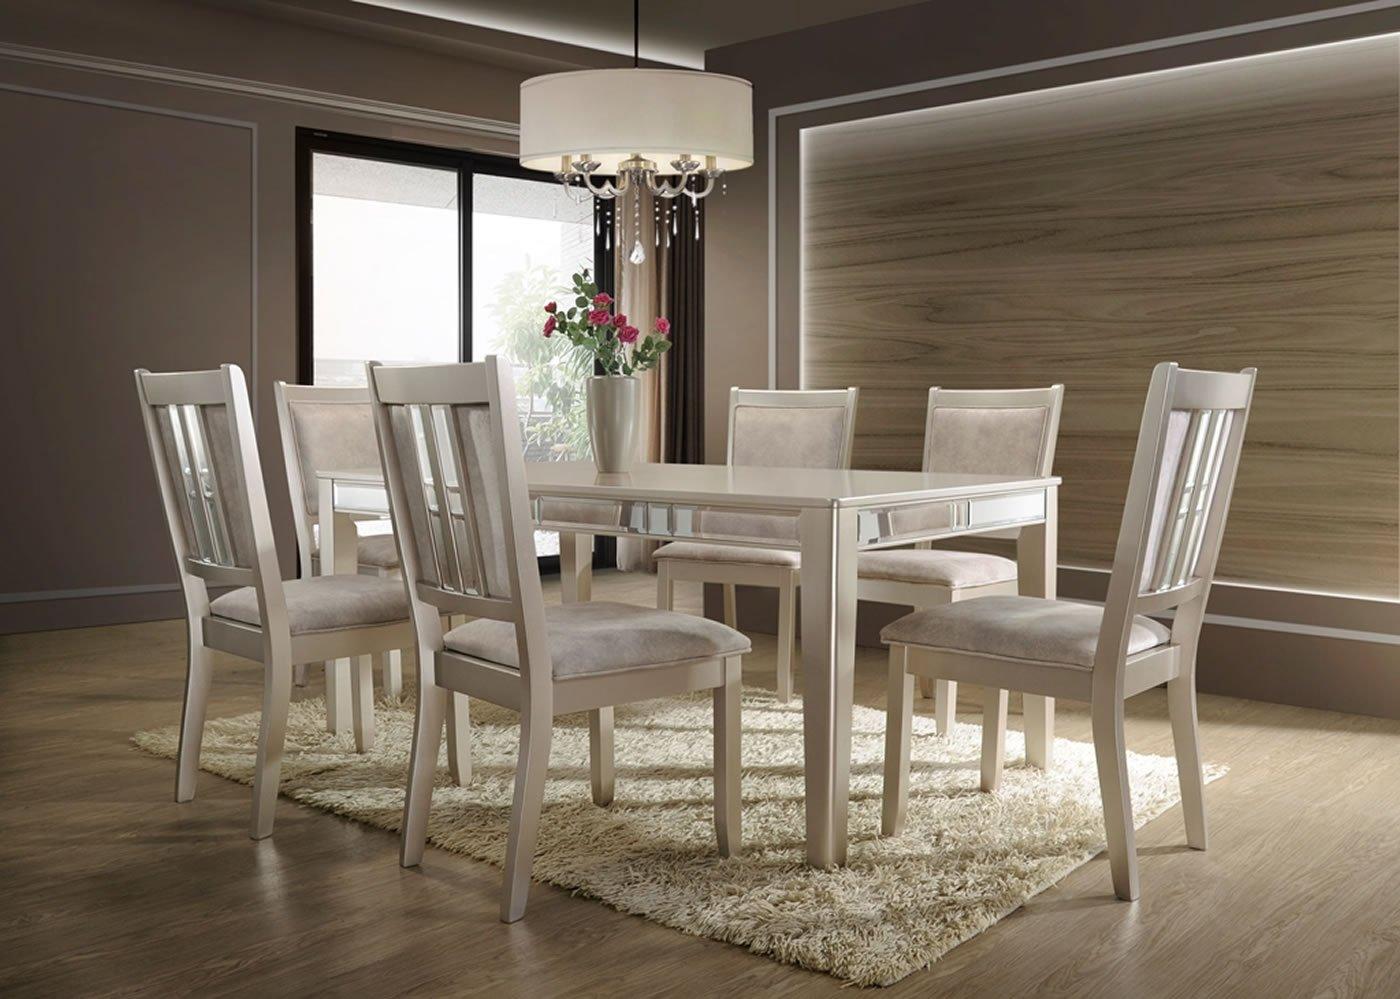 Modern Dining Sets D9500 DINING SET D9500 DINING SET-7 in Beige Mirrored